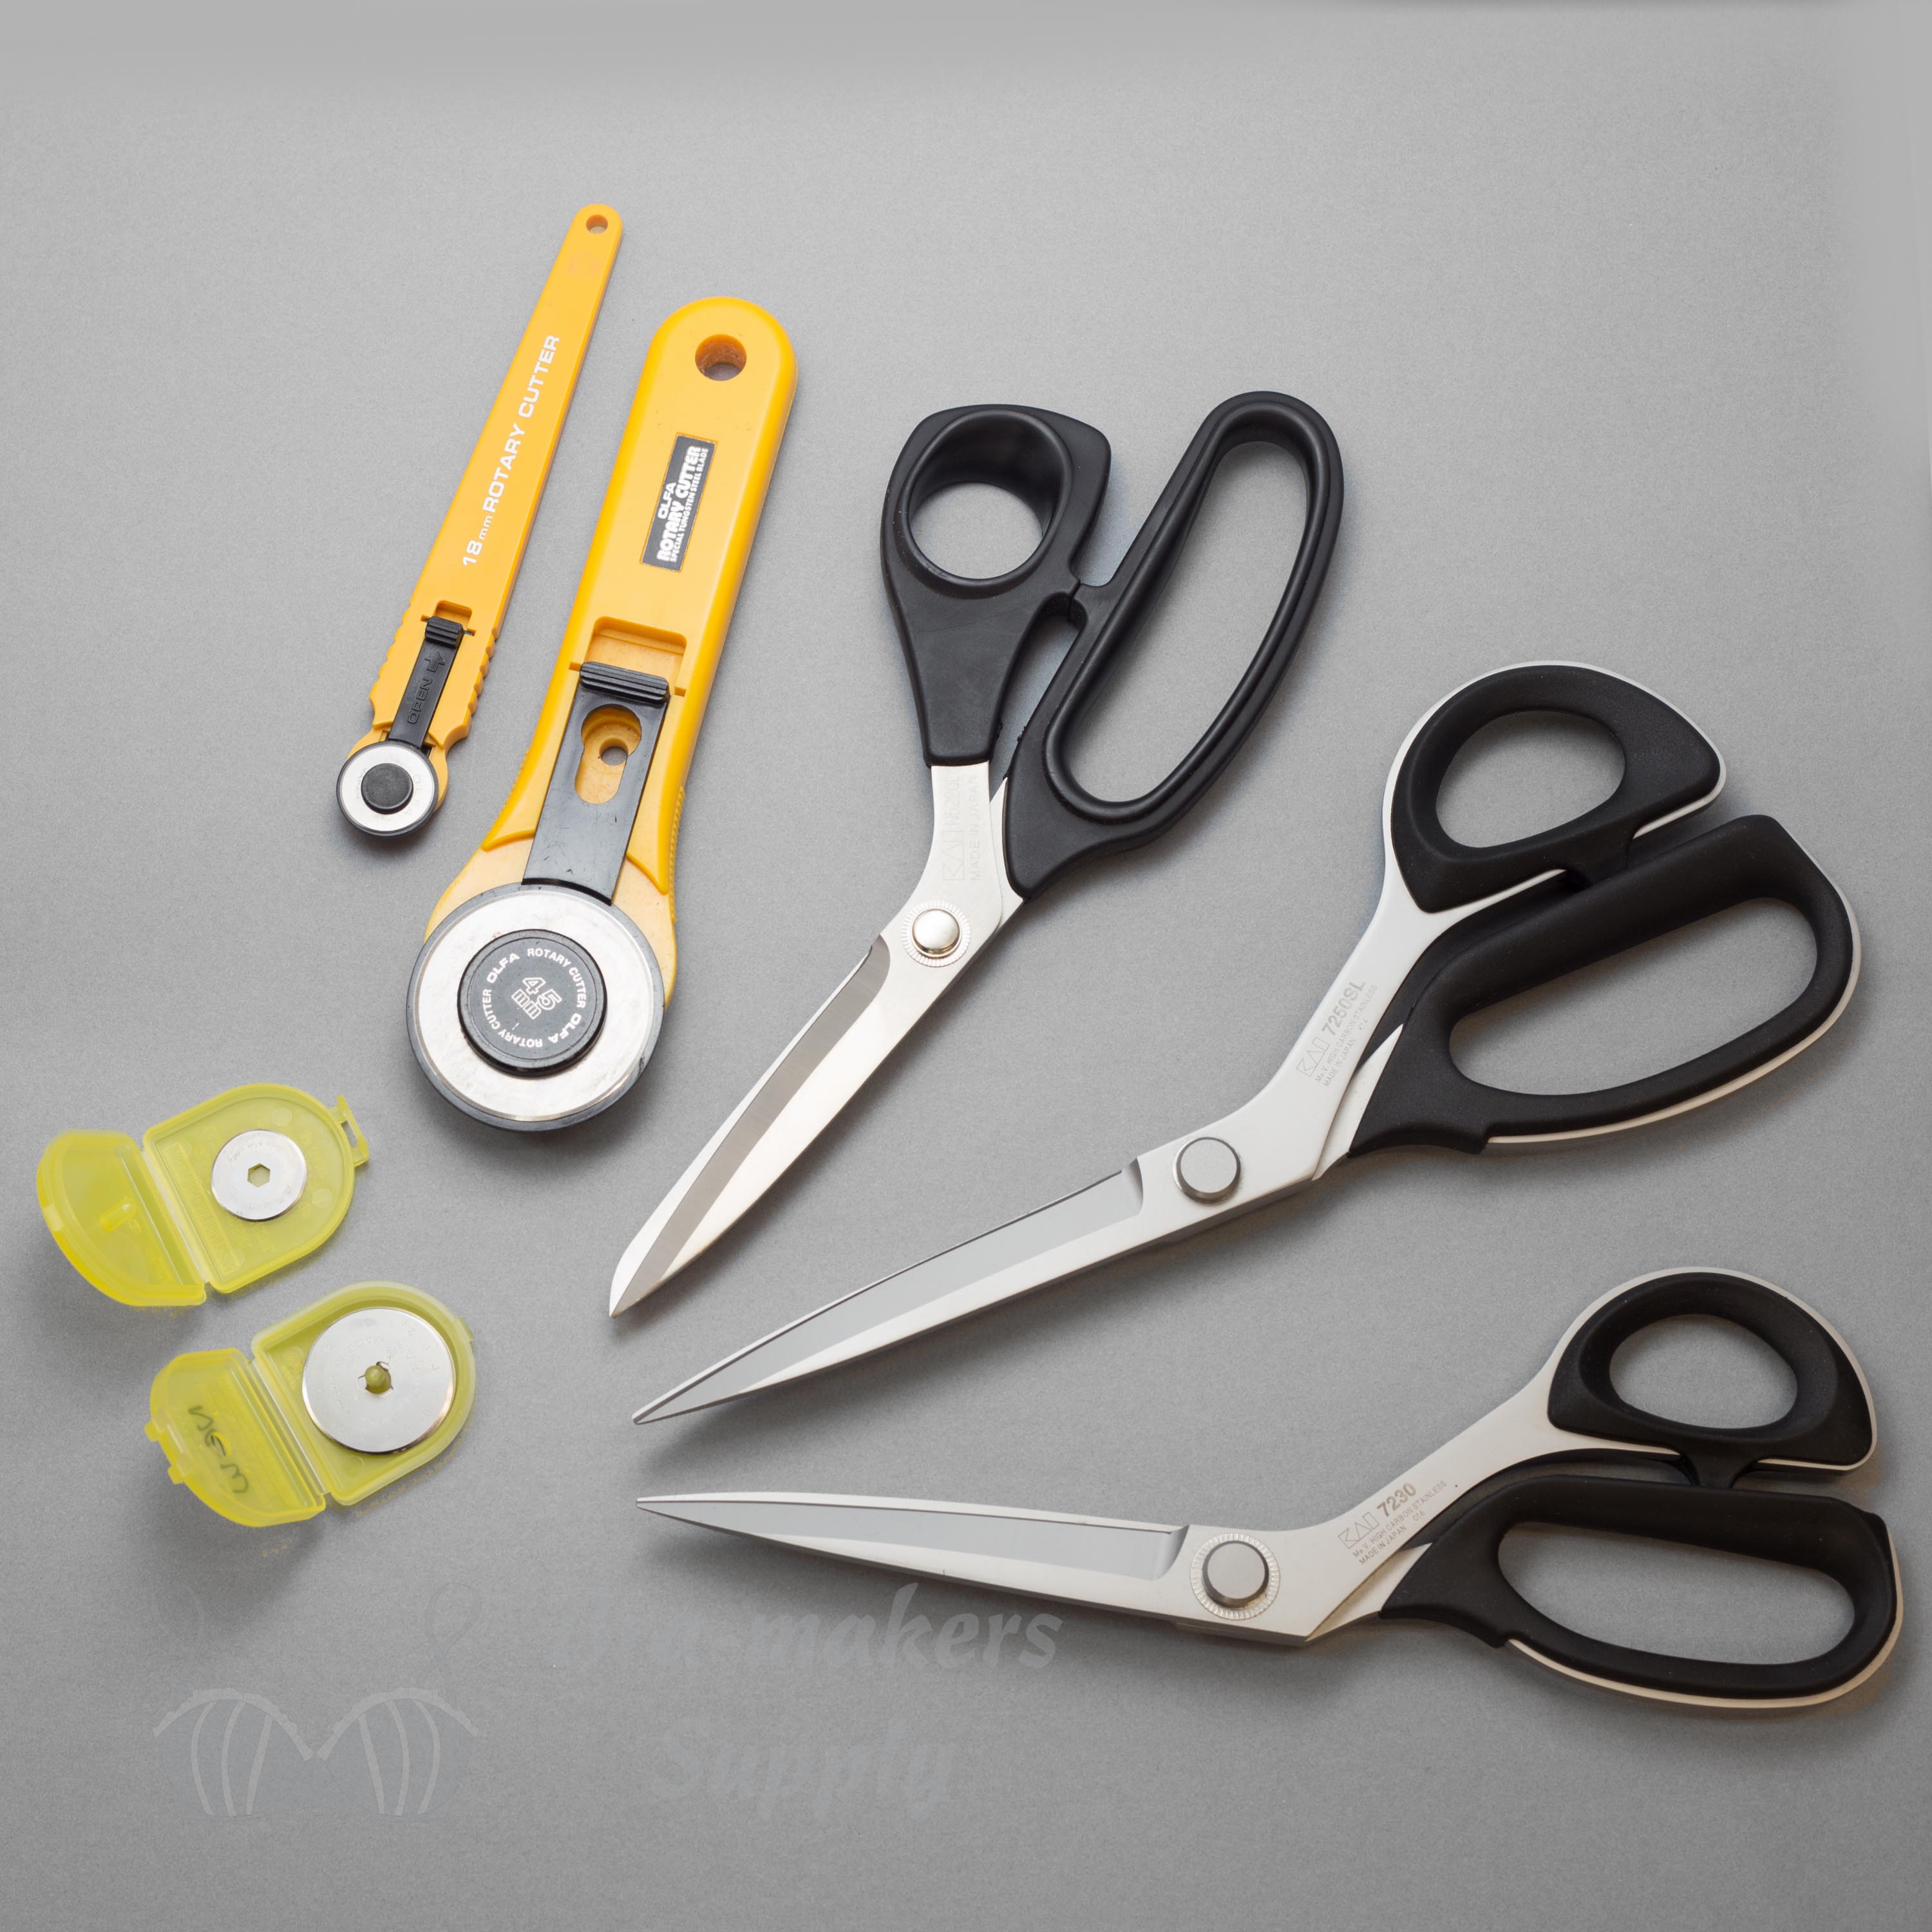 Scissors and Cutting Supplies